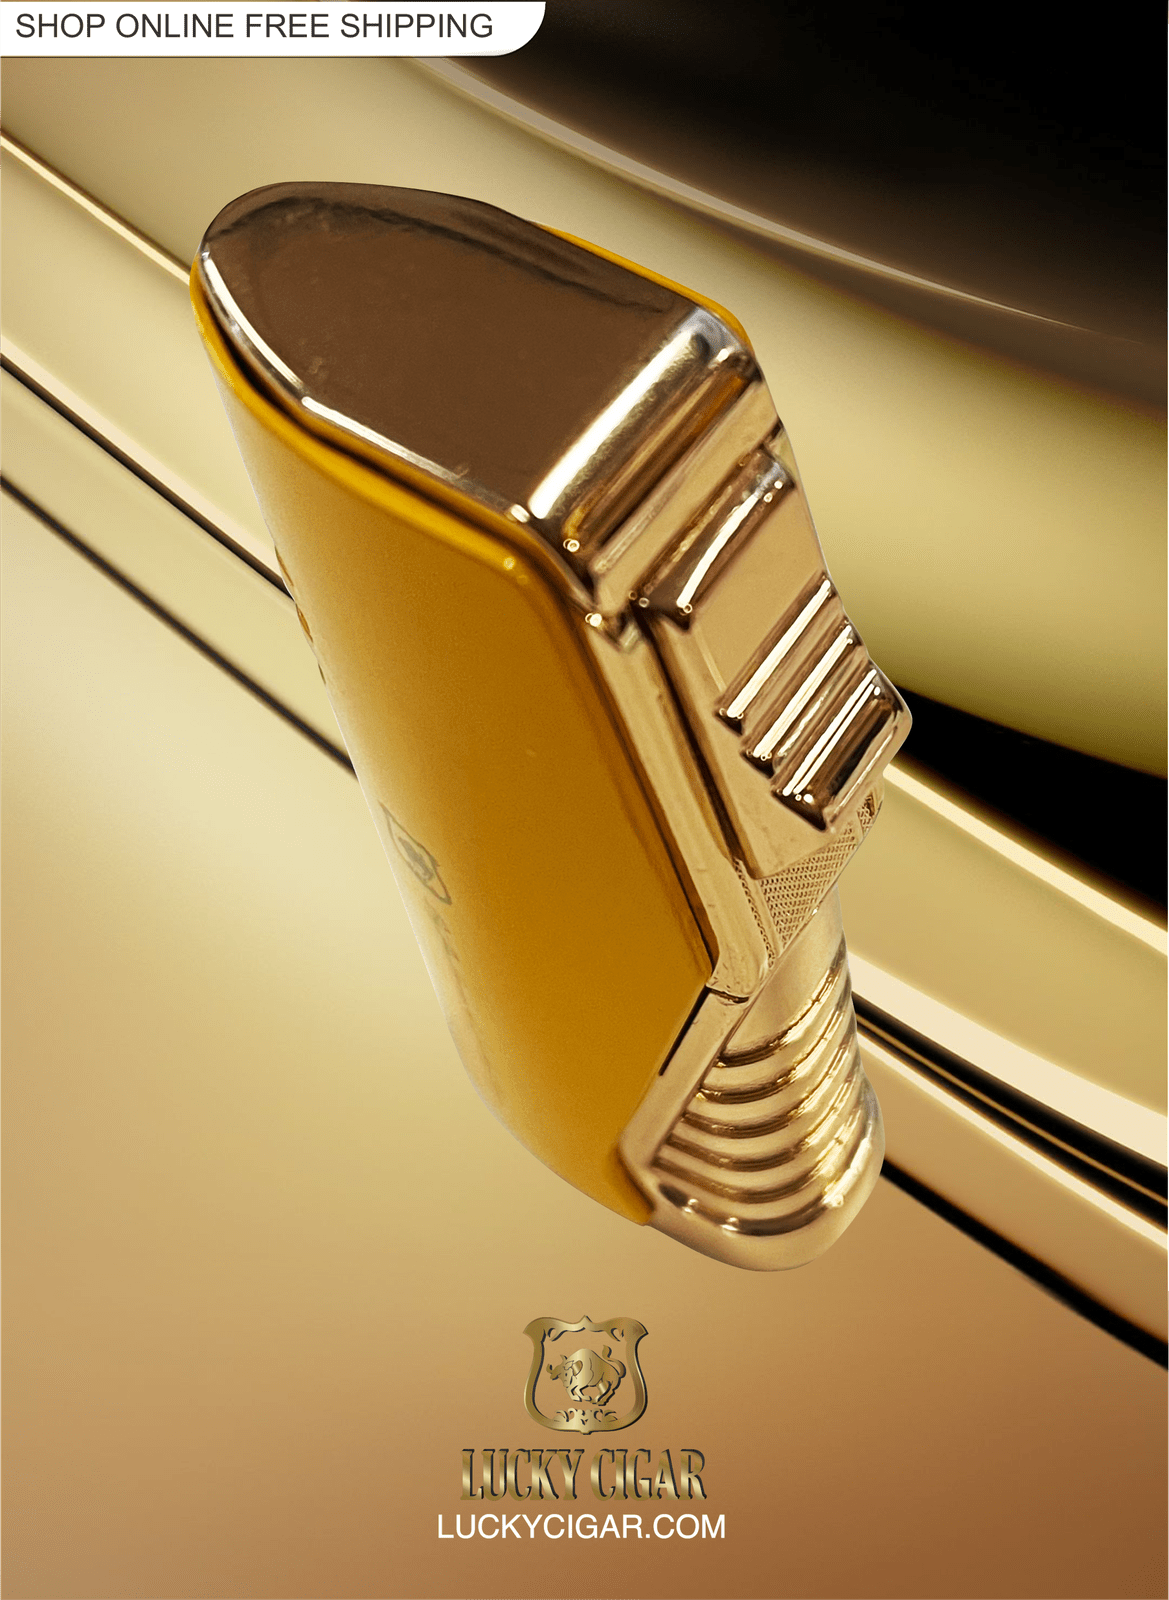 Cigar Lifestyle Accessories: Torch Lighter in Yellow/Gold